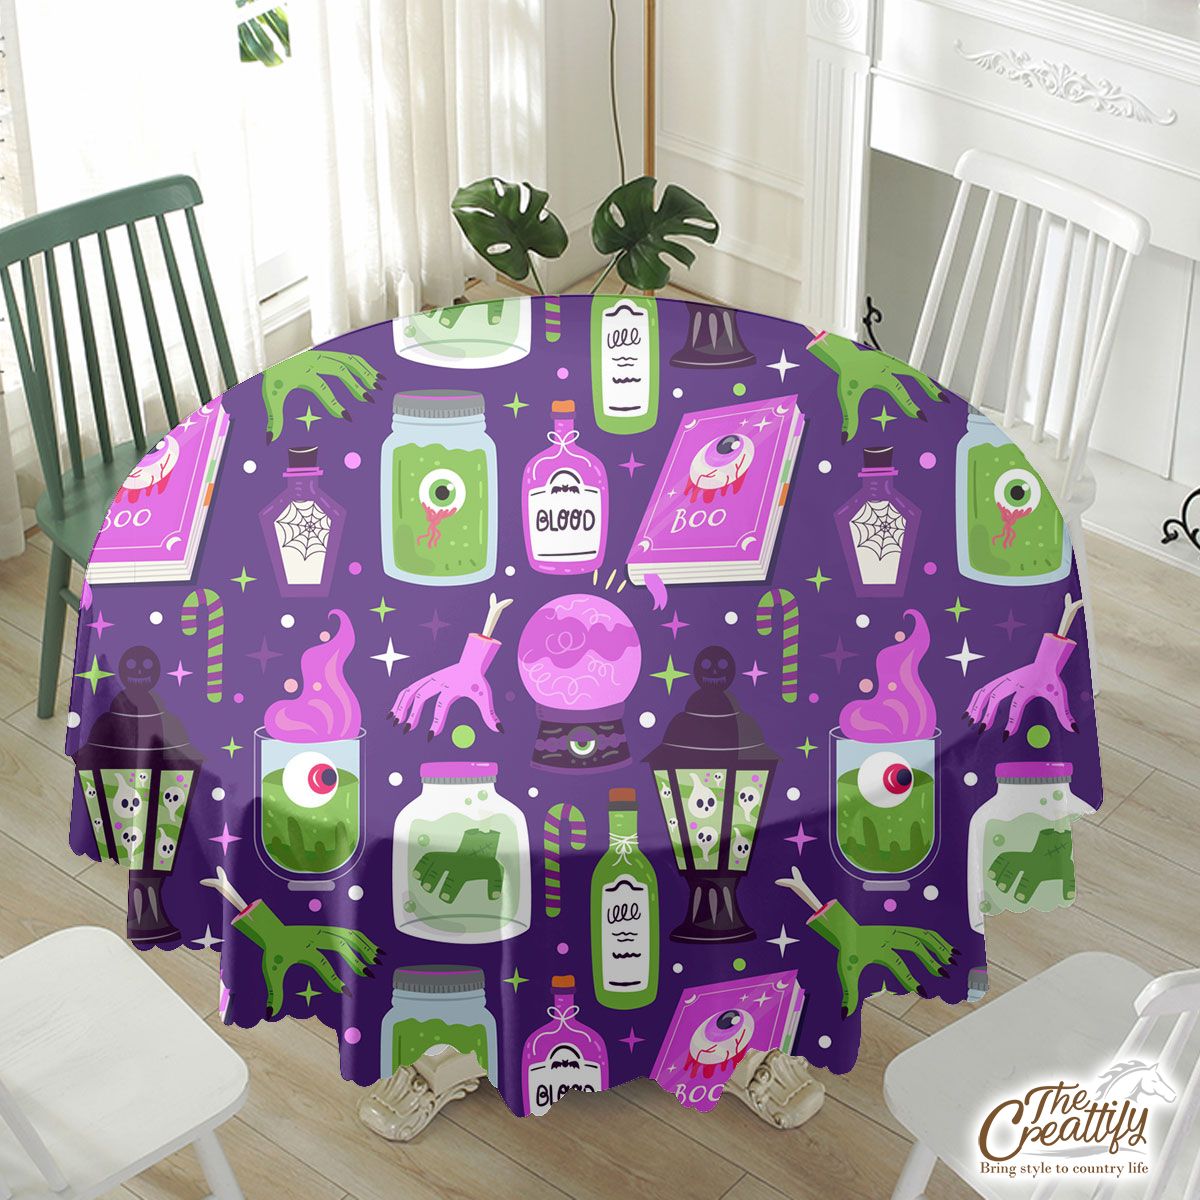 Witch Potions, Creepy Hand, Blood, Wicked Witches Dark Halloween Waterproof Tablecloth